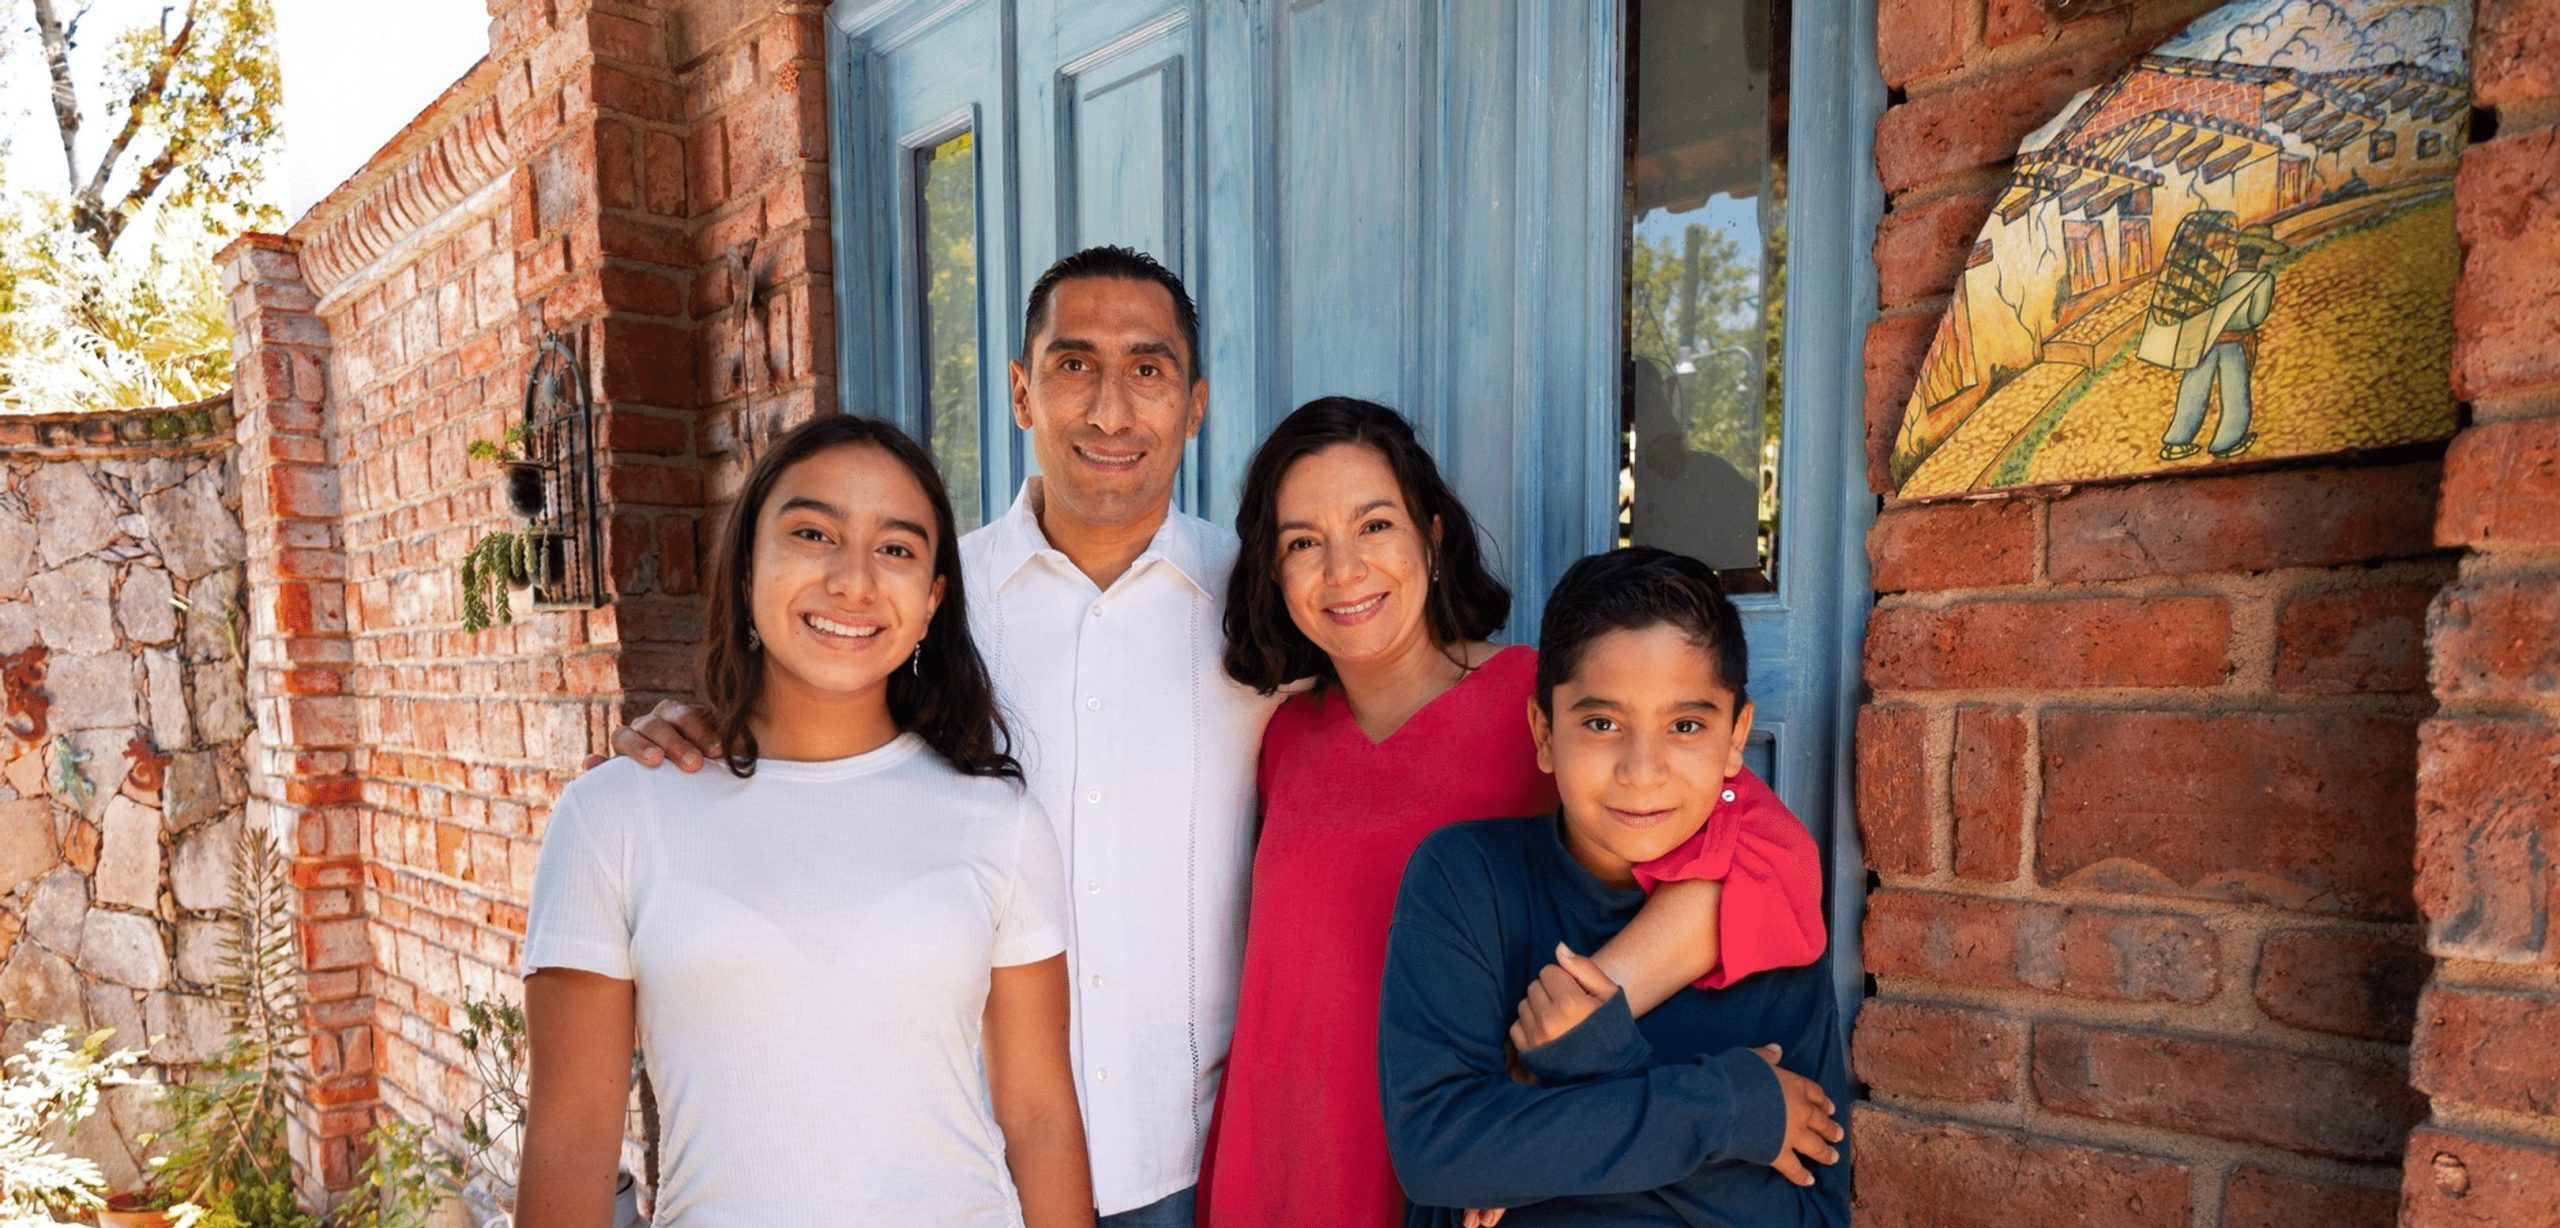 https://cityofrefugecolumbia.org/wp-content/uploads/2023/04/smiley-mexican-family-front-view-scaled-e1681211127142.jpg